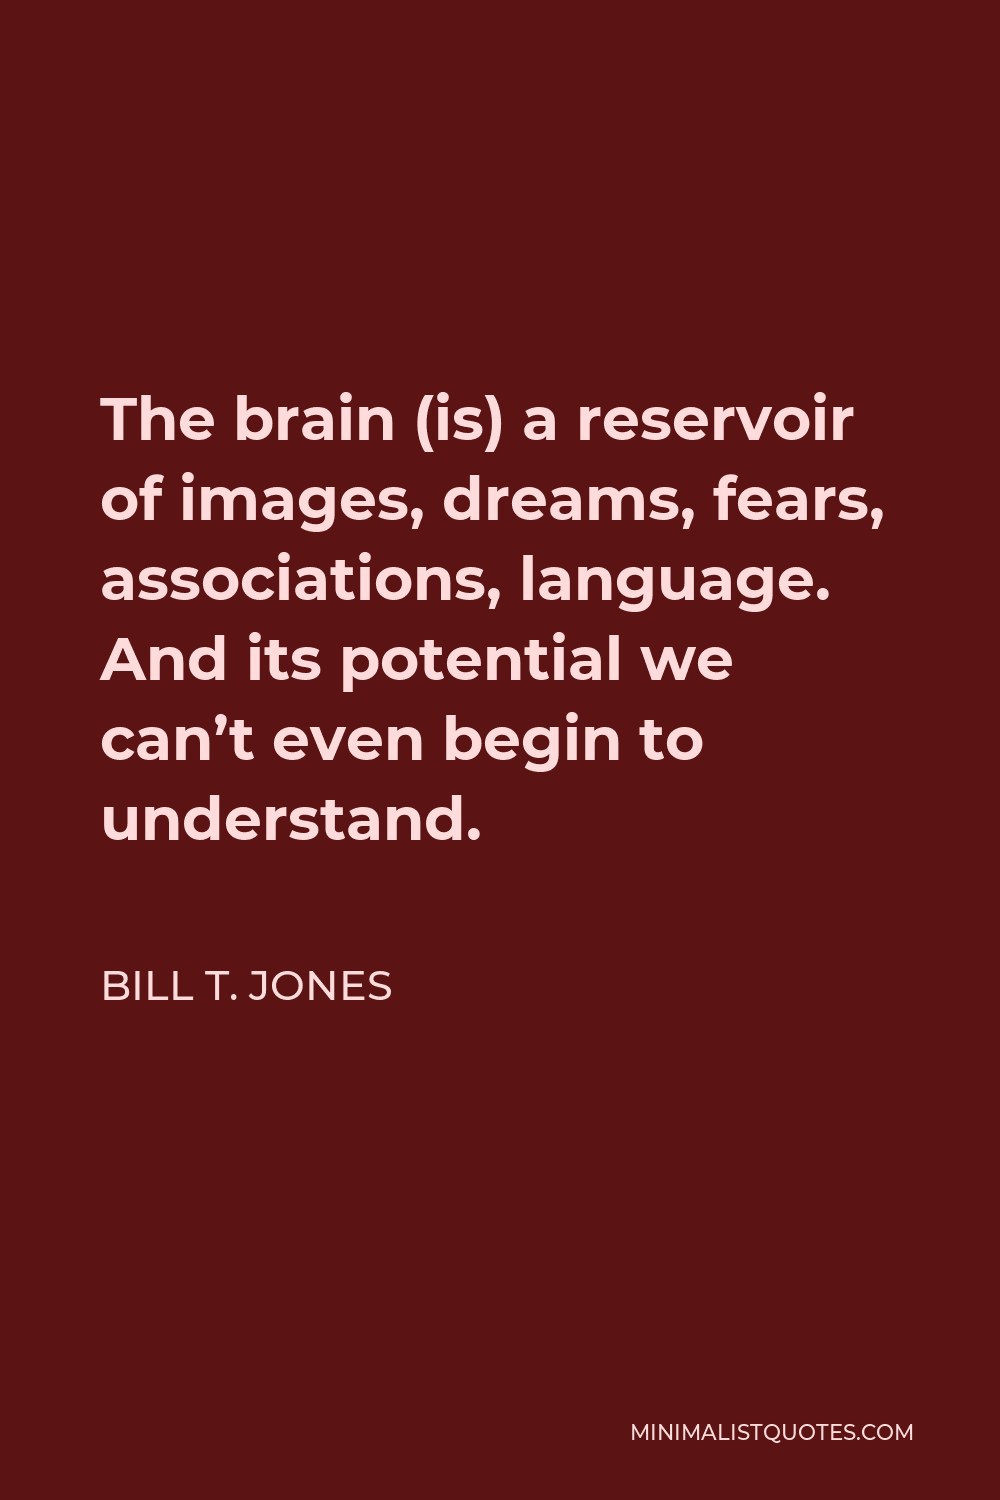 Bill T. Jones Quote - The brain (is) a reservoir of images, dreams, fears, associations, language. And its potential we can’t even begin to understand.